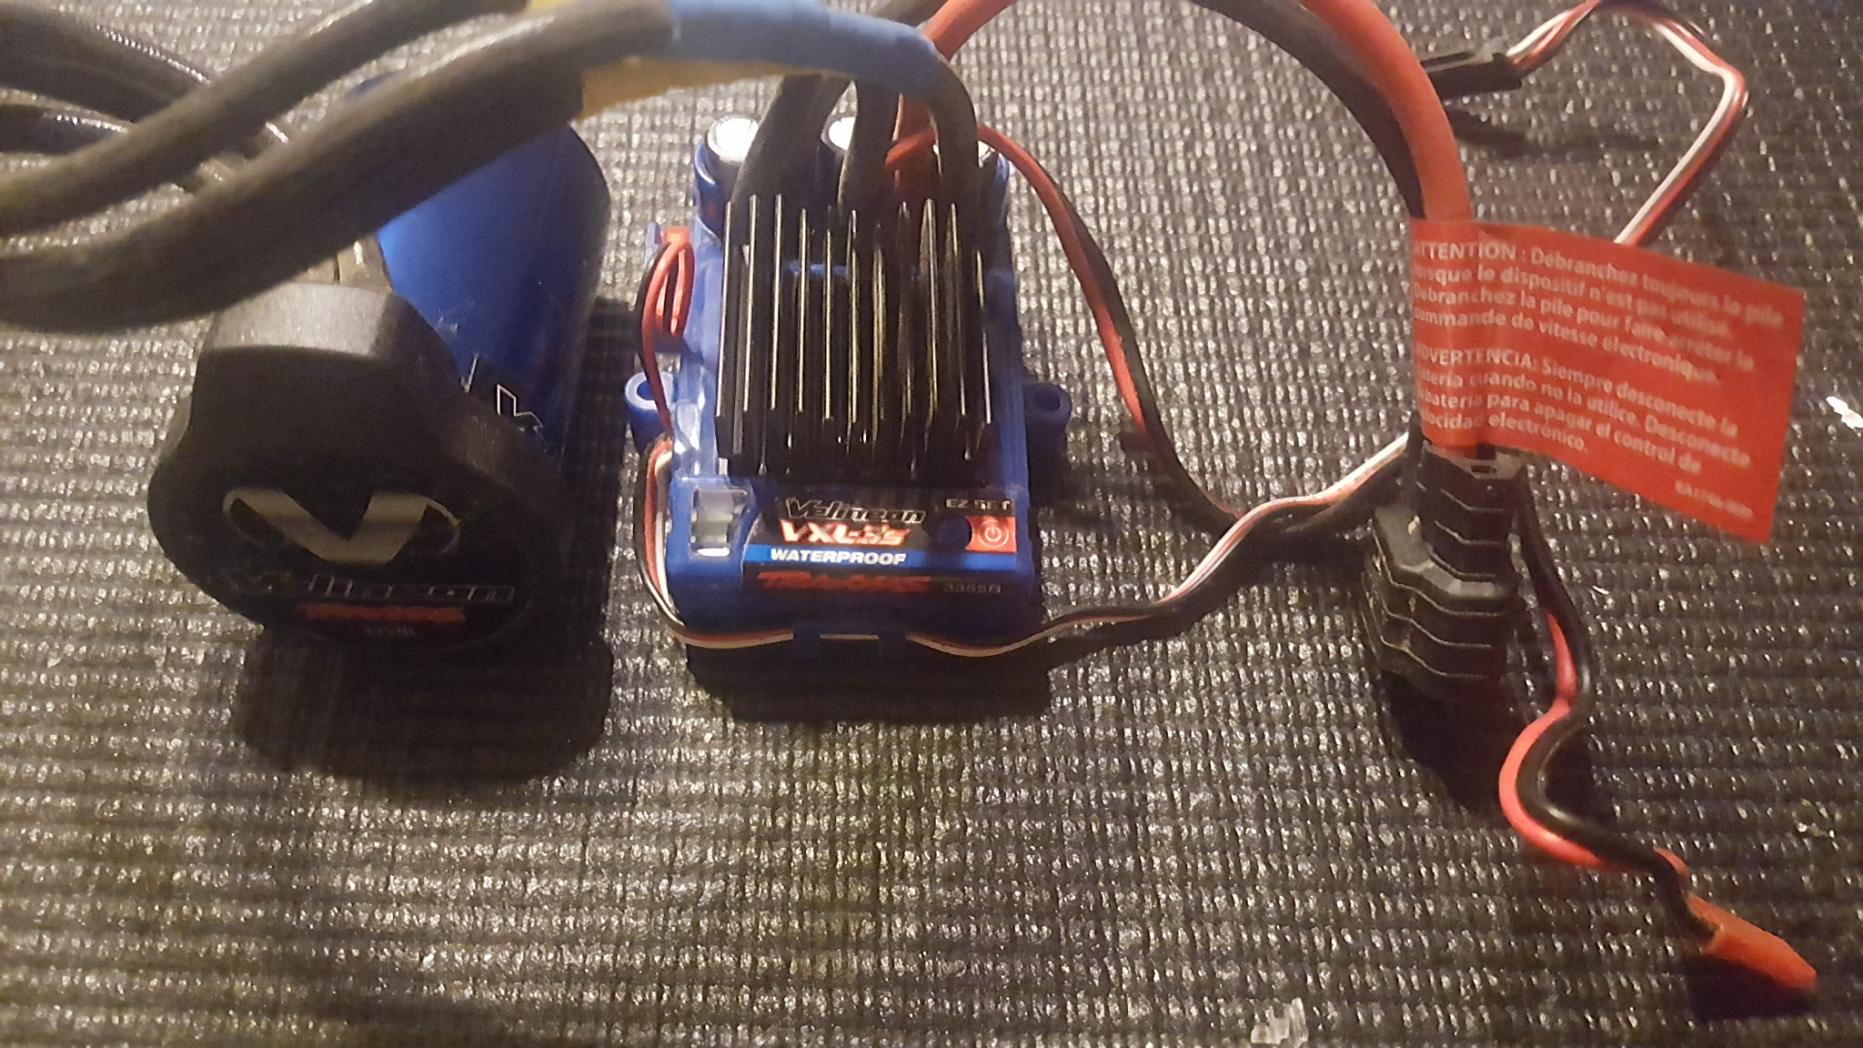 Traxxas vxl 3s with 4 pole motor - R/C Tech Forums